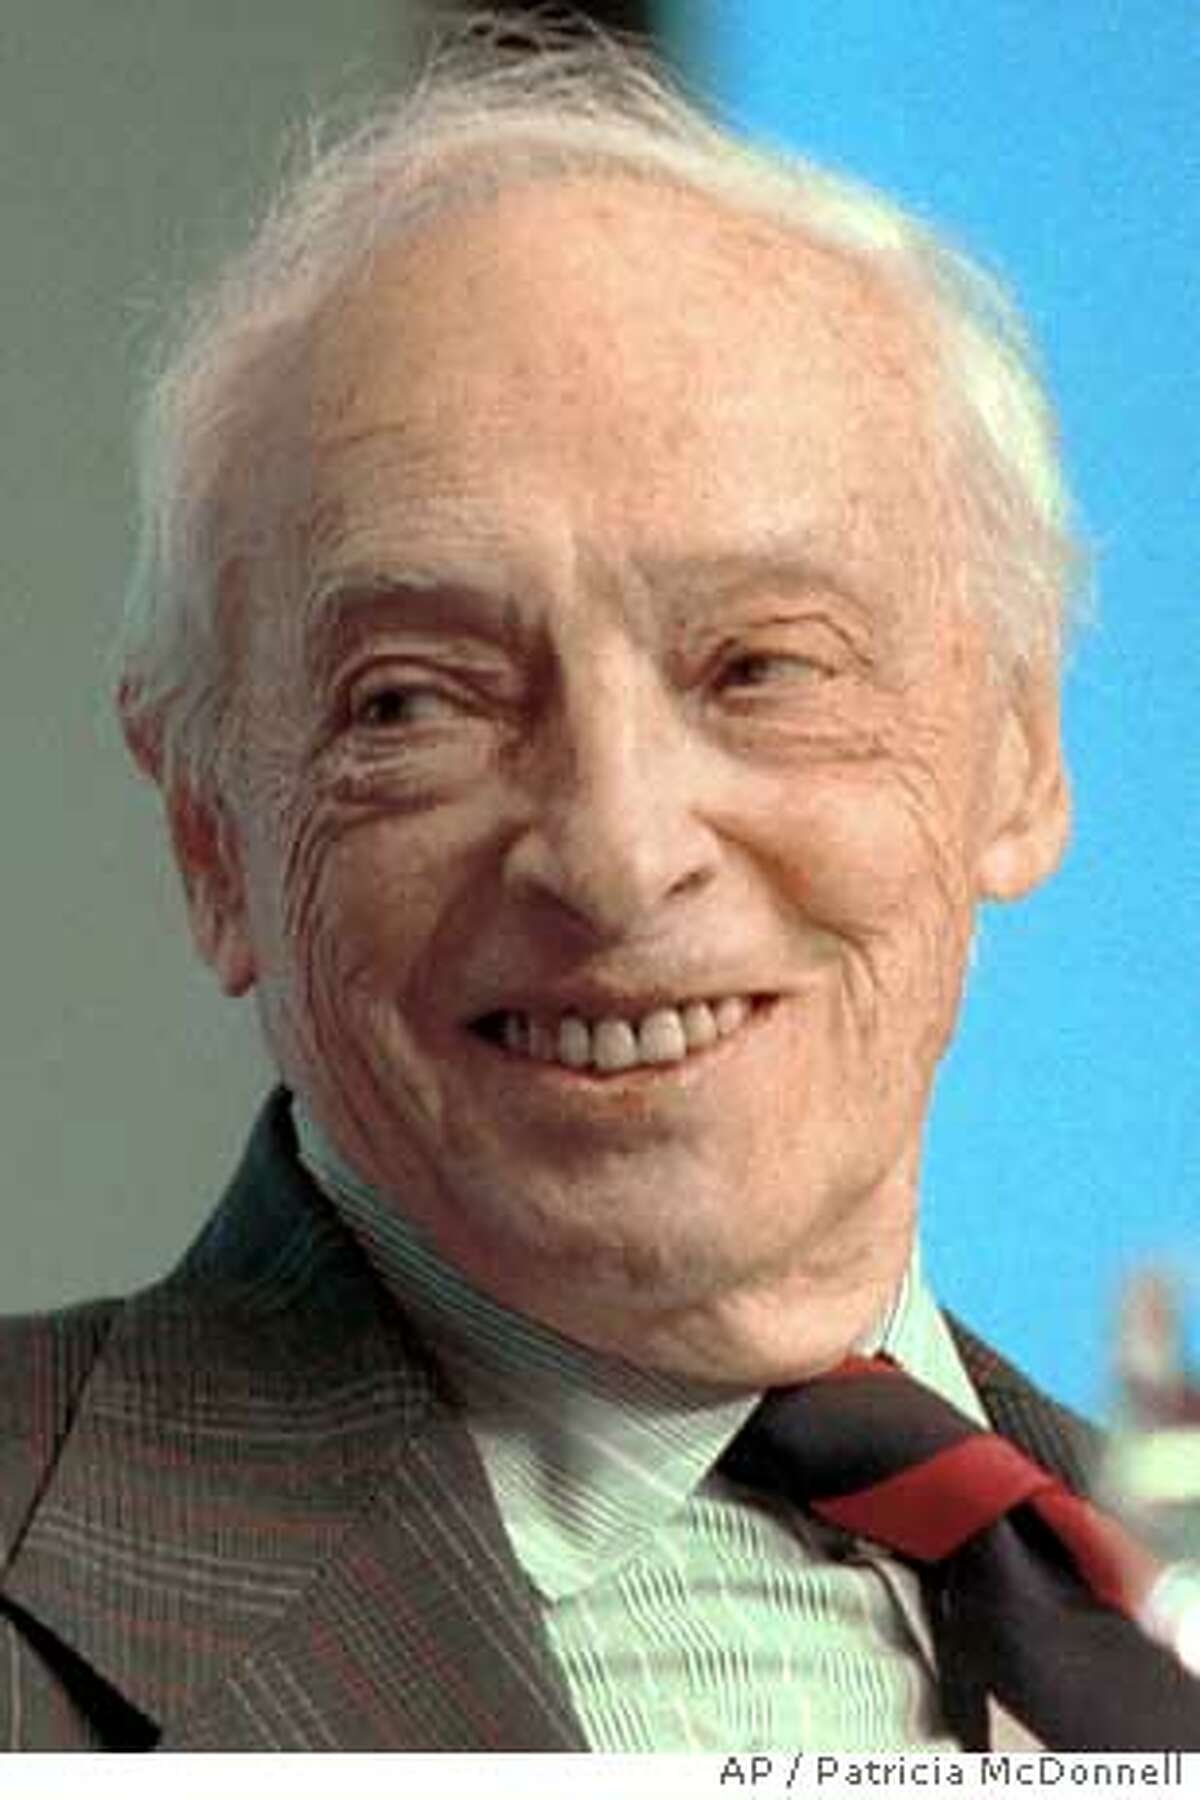 ** FILE ** This is a 1999 file photo of author Saul Bellow during a writers conference in Boston. Nobel laureate Bellow, a master of comic melancholy who in "Herzog," "Humboldt's Gift" and other novels both championed and mourned the soul's fate in the modern world, died Tuesday, April 5, 2005. He was 89. (AP Photo/Patricia McDonnell) Ran on: 04-13-2005 Pope John Paul II, Saul Bellow and Monacos Prince Rainier III (at left).